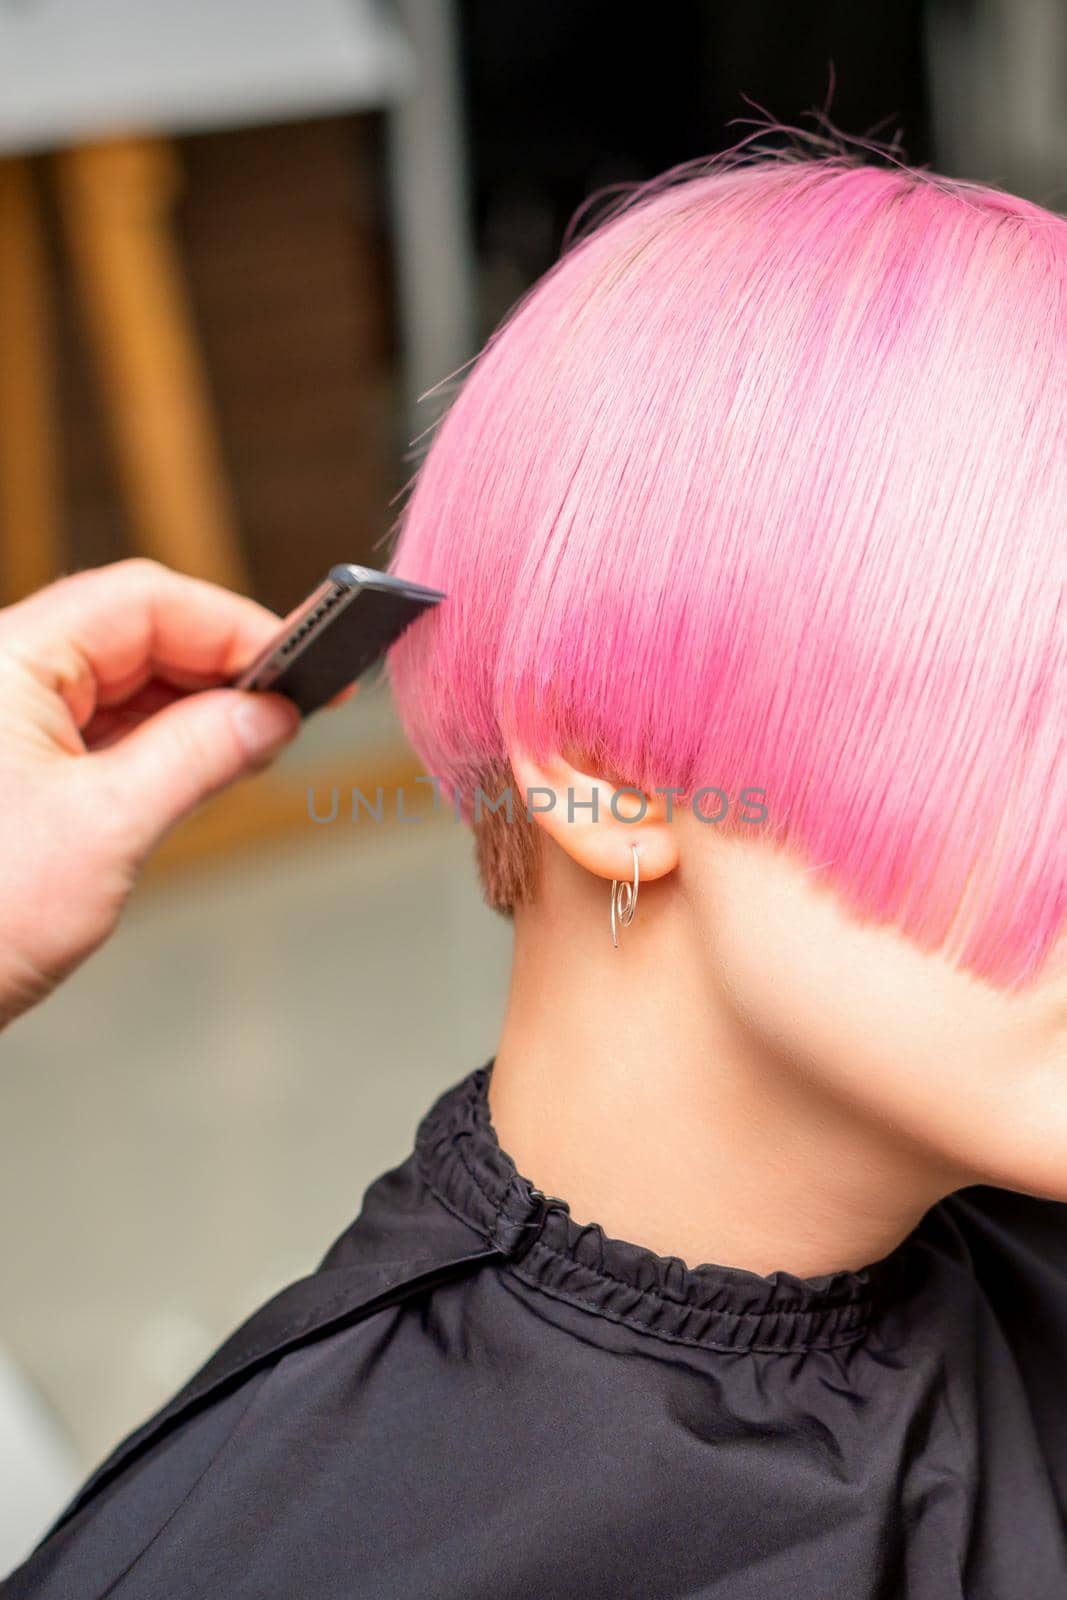 A hairdresser is combing the dyed pink short hair of the female client in a hairdresser salon. by okskukuruza